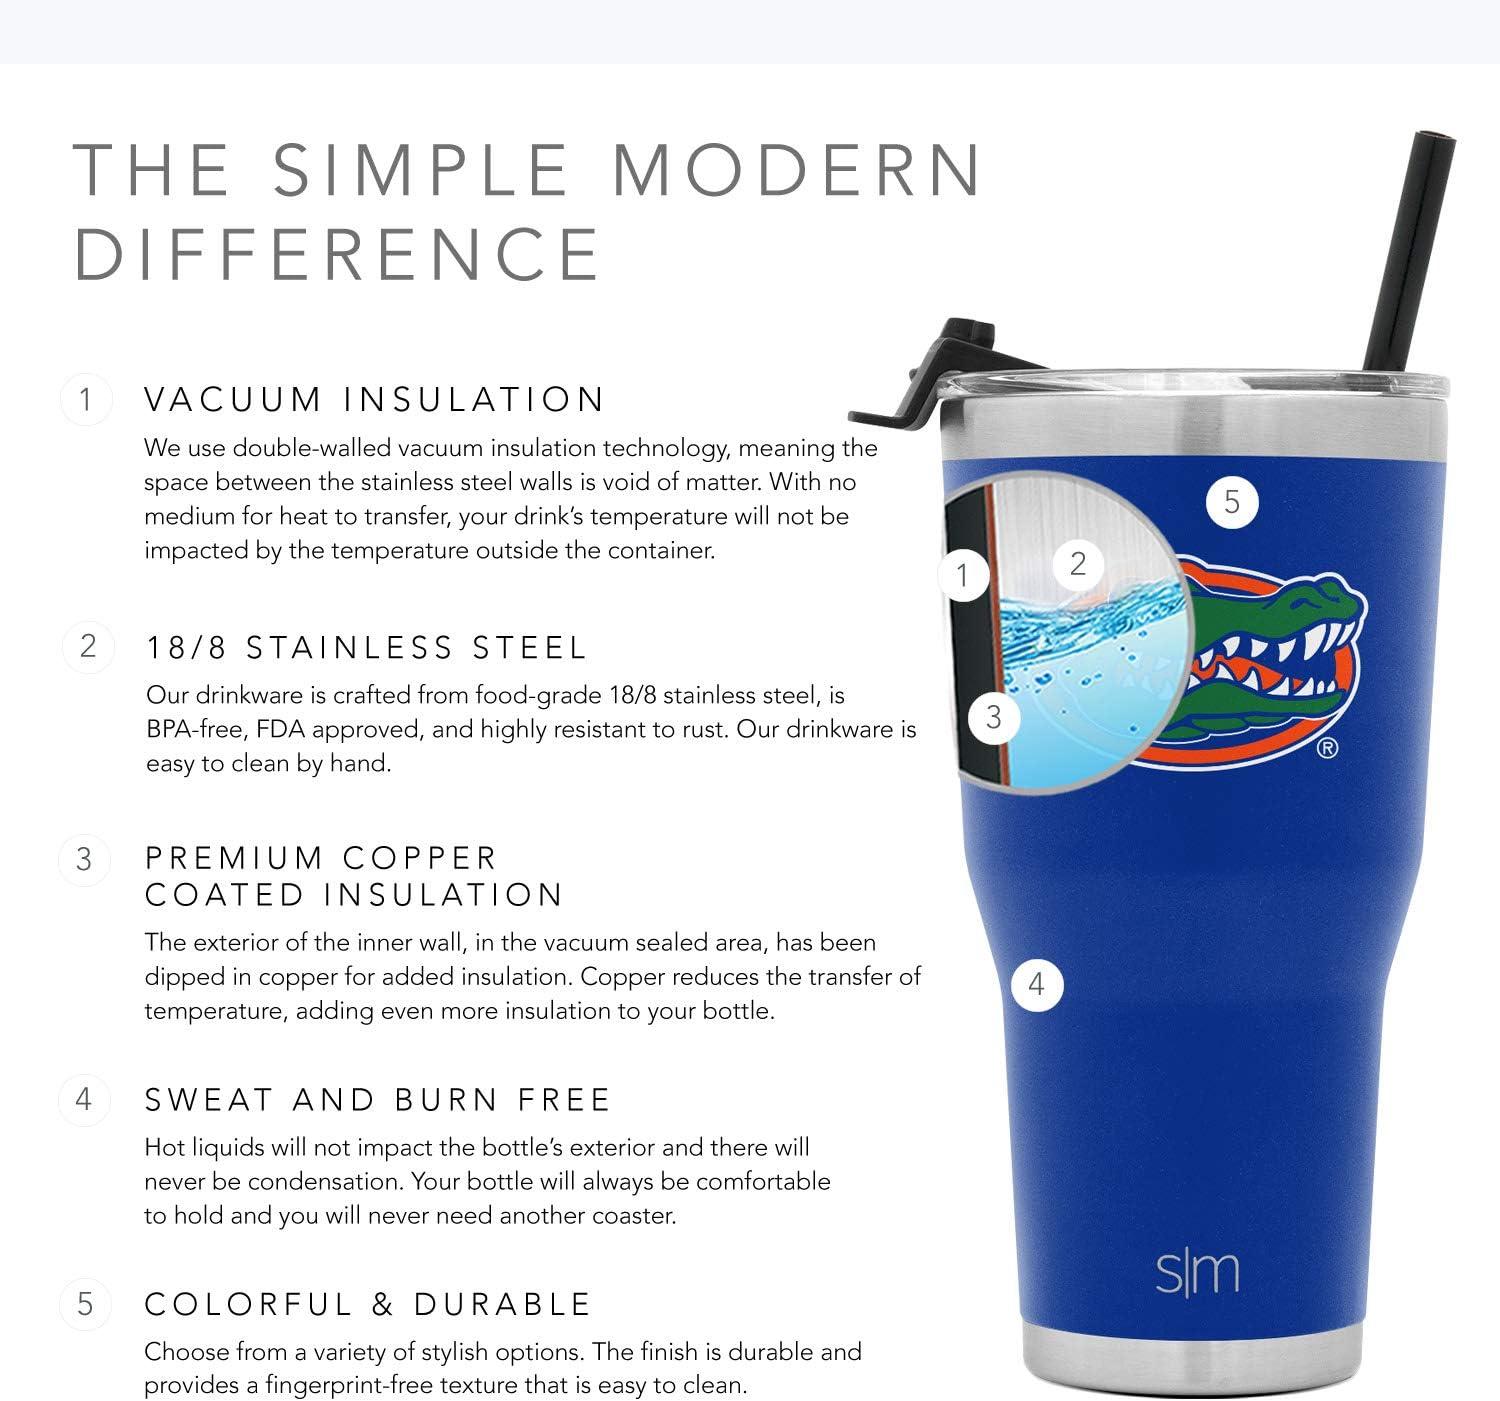 Simple Modern Officially Licensed Water Bottle with Straw Lid Florida Gators